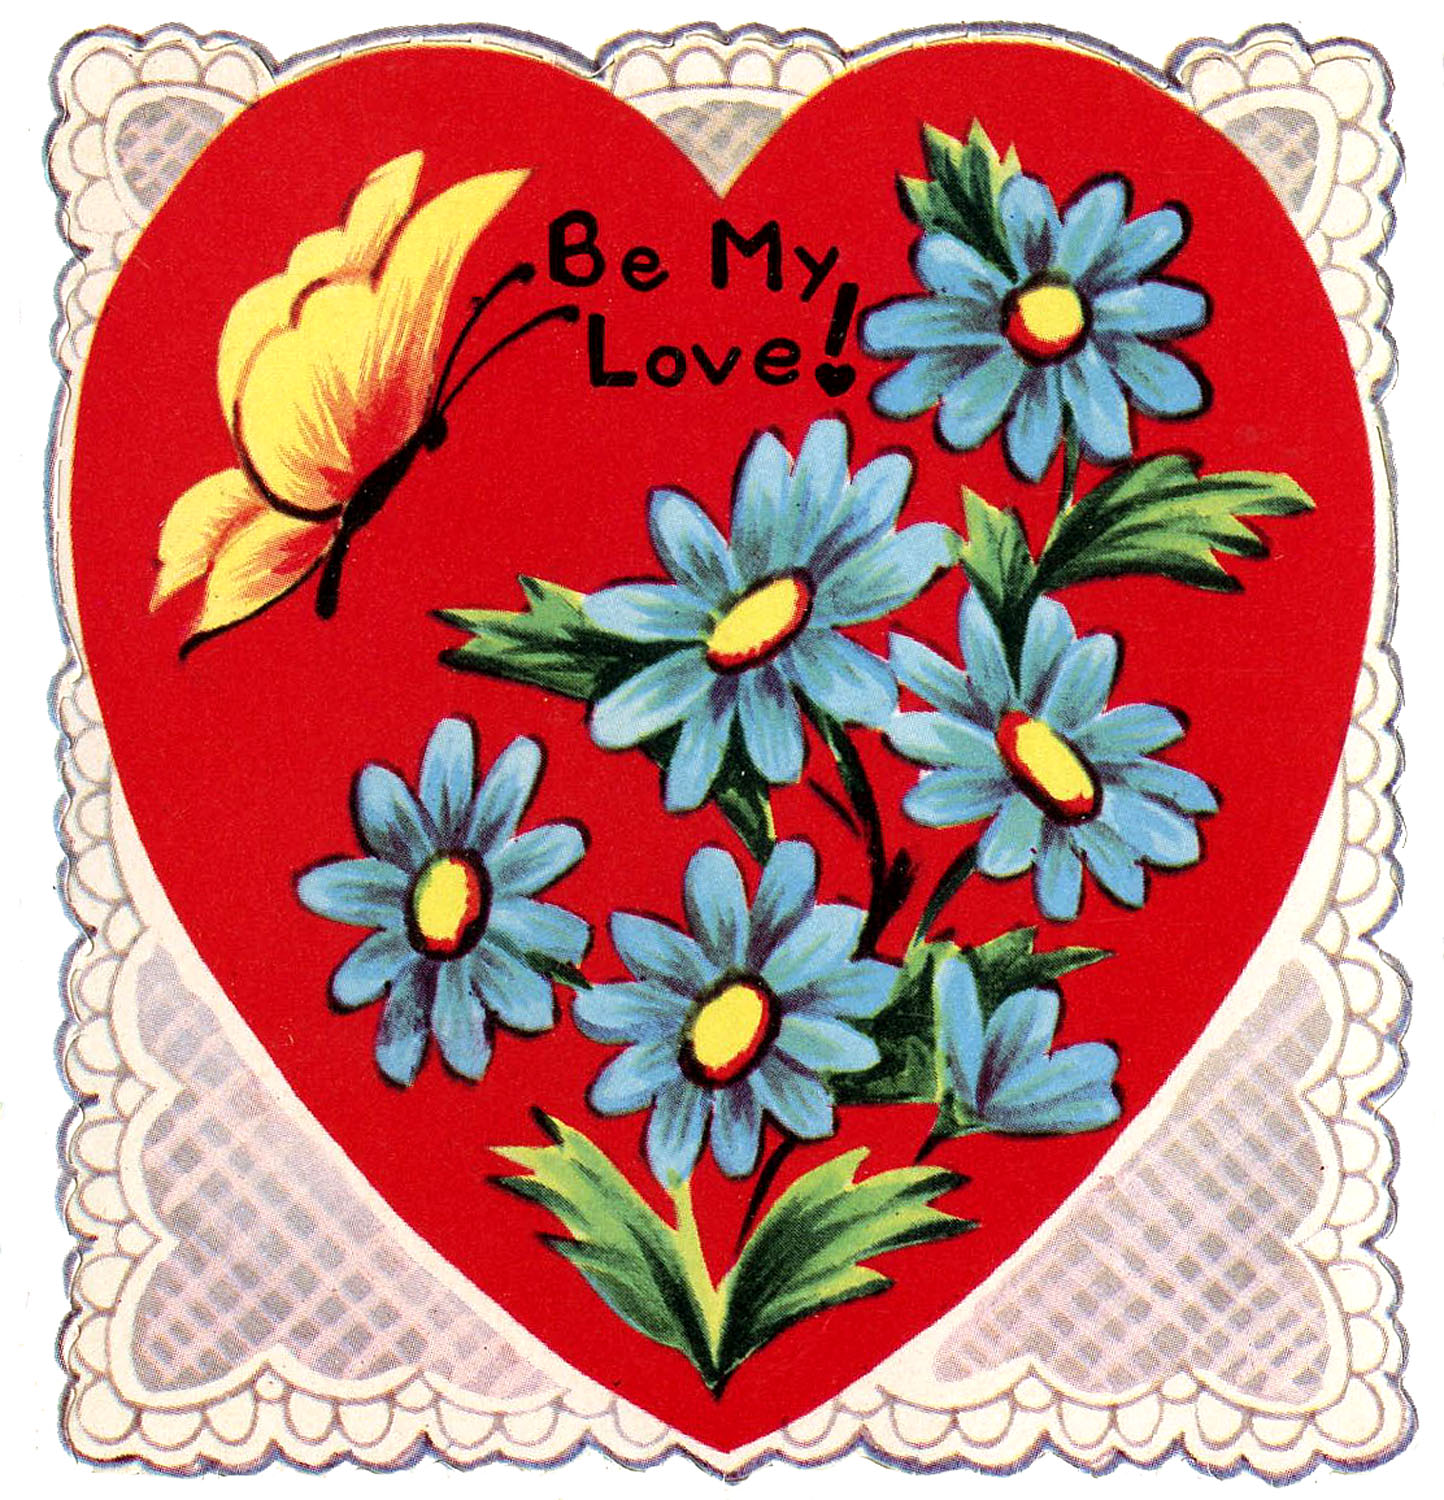 Retro Image - Valentine - Lace, Heart, Butterfly - The Graphics Fairy